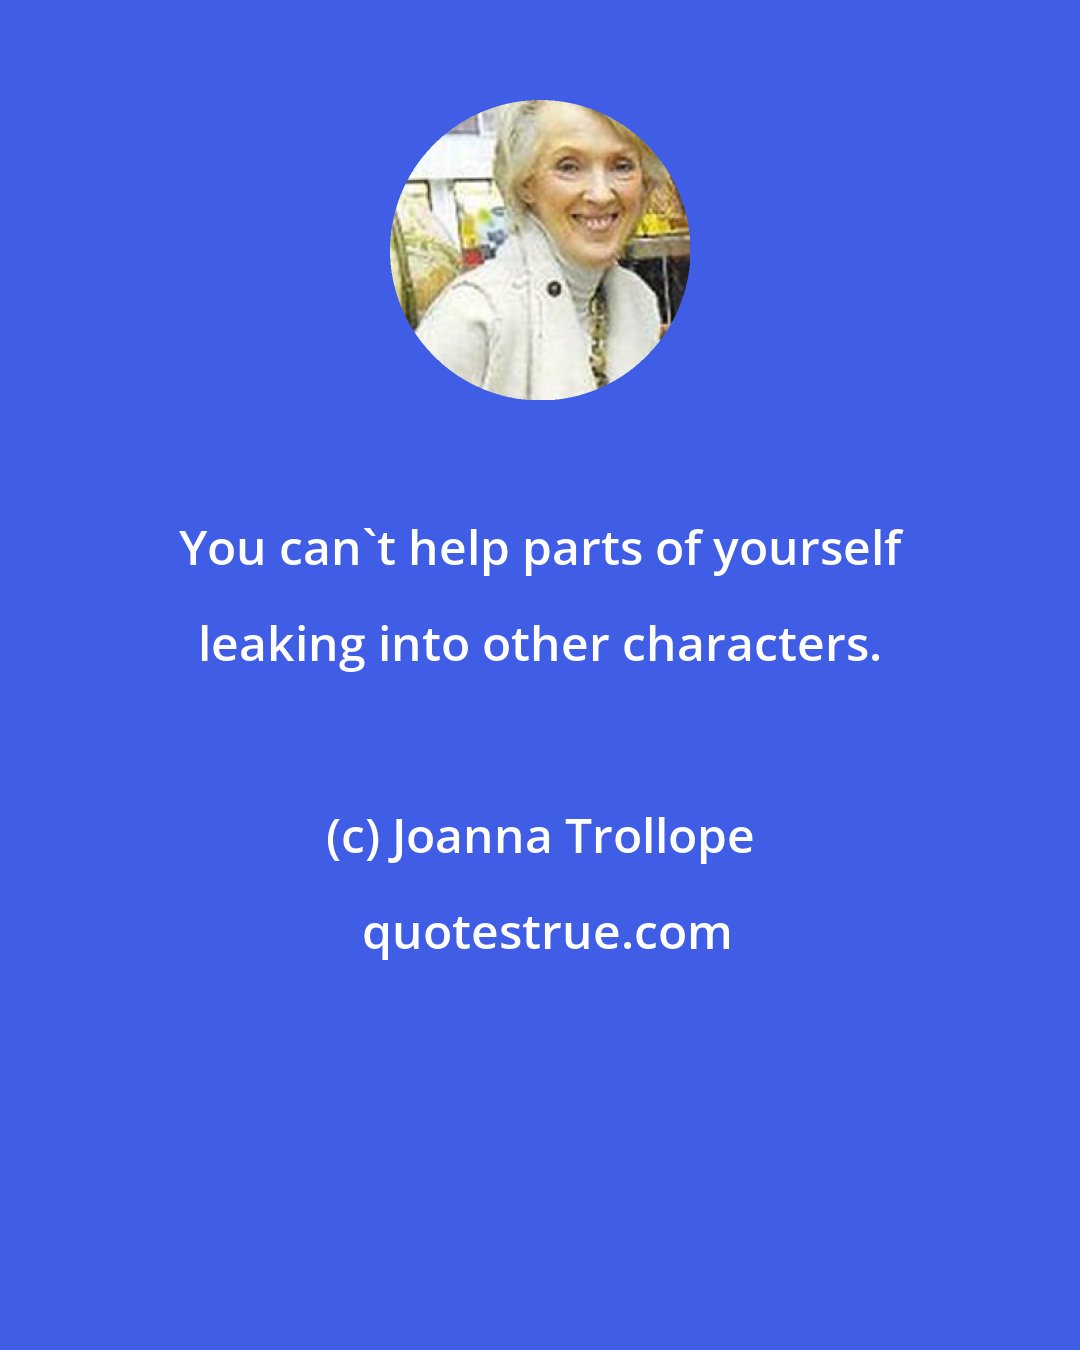 Joanna Trollope: You can't help parts of yourself leaking into other characters.